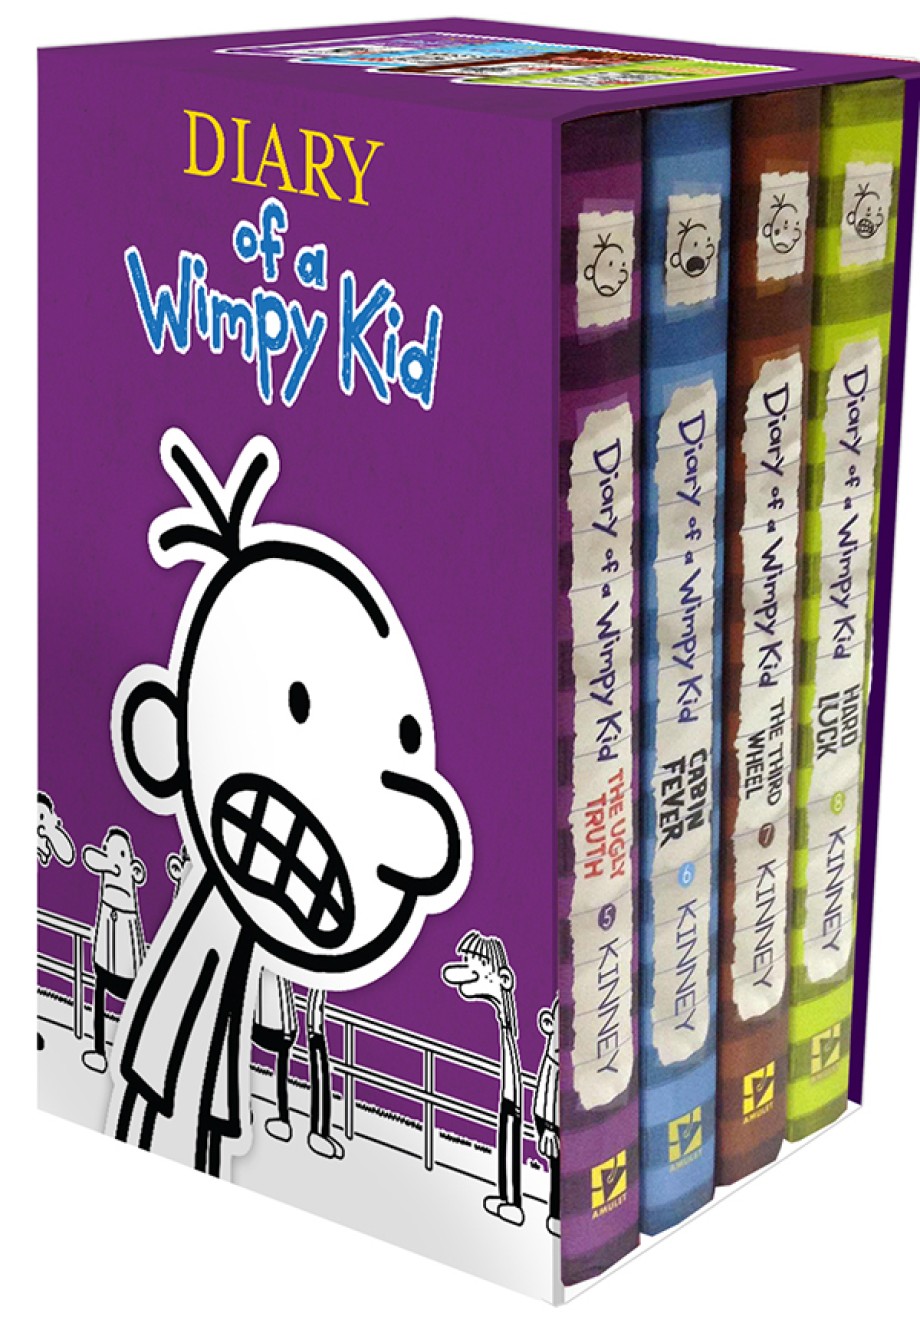 Jeff Kinney Talks the Diary of a Wimpy Kid New Book and Disney+